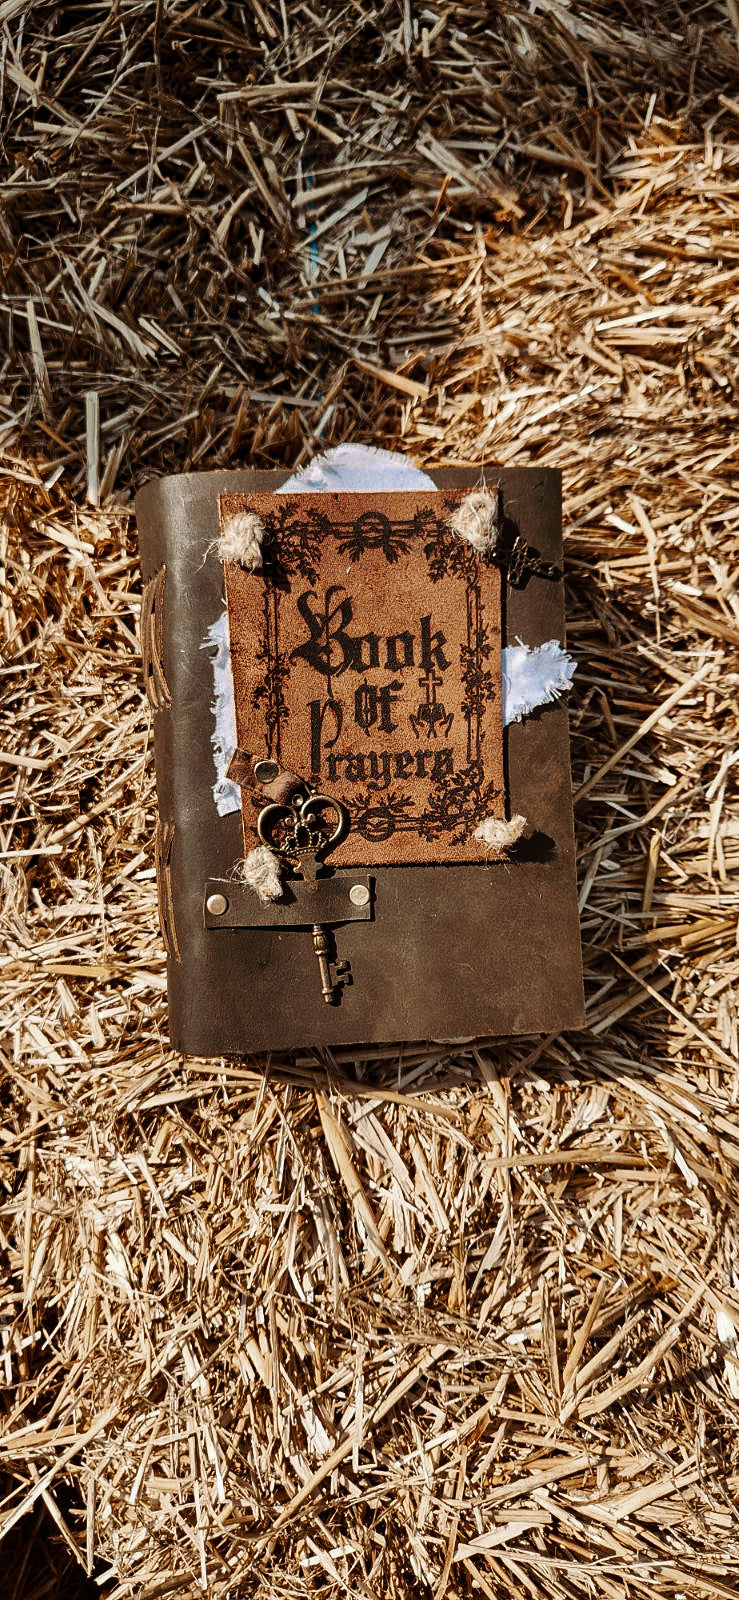 Book of Prayers leather journal